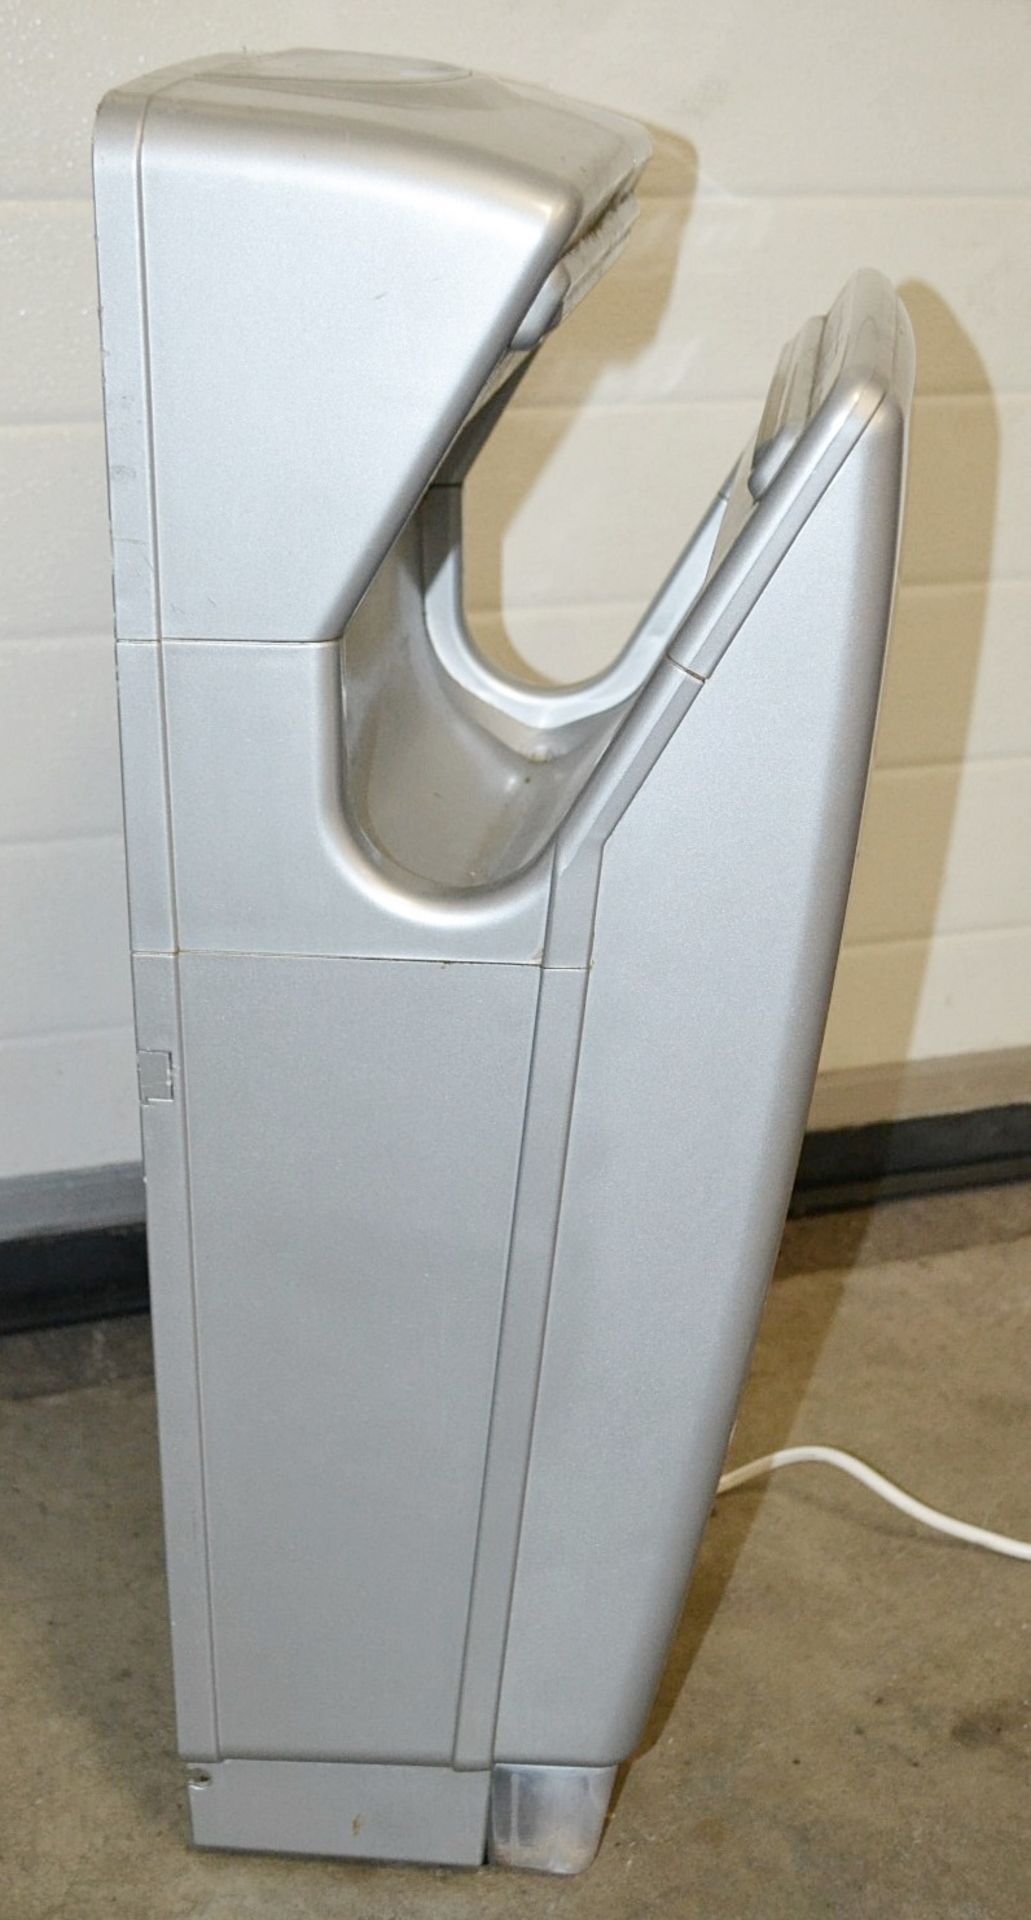 1 x BIODRIER Business Automatic Hand Dryer In Silver - Model: BB70S - Used - Image 8 of 9